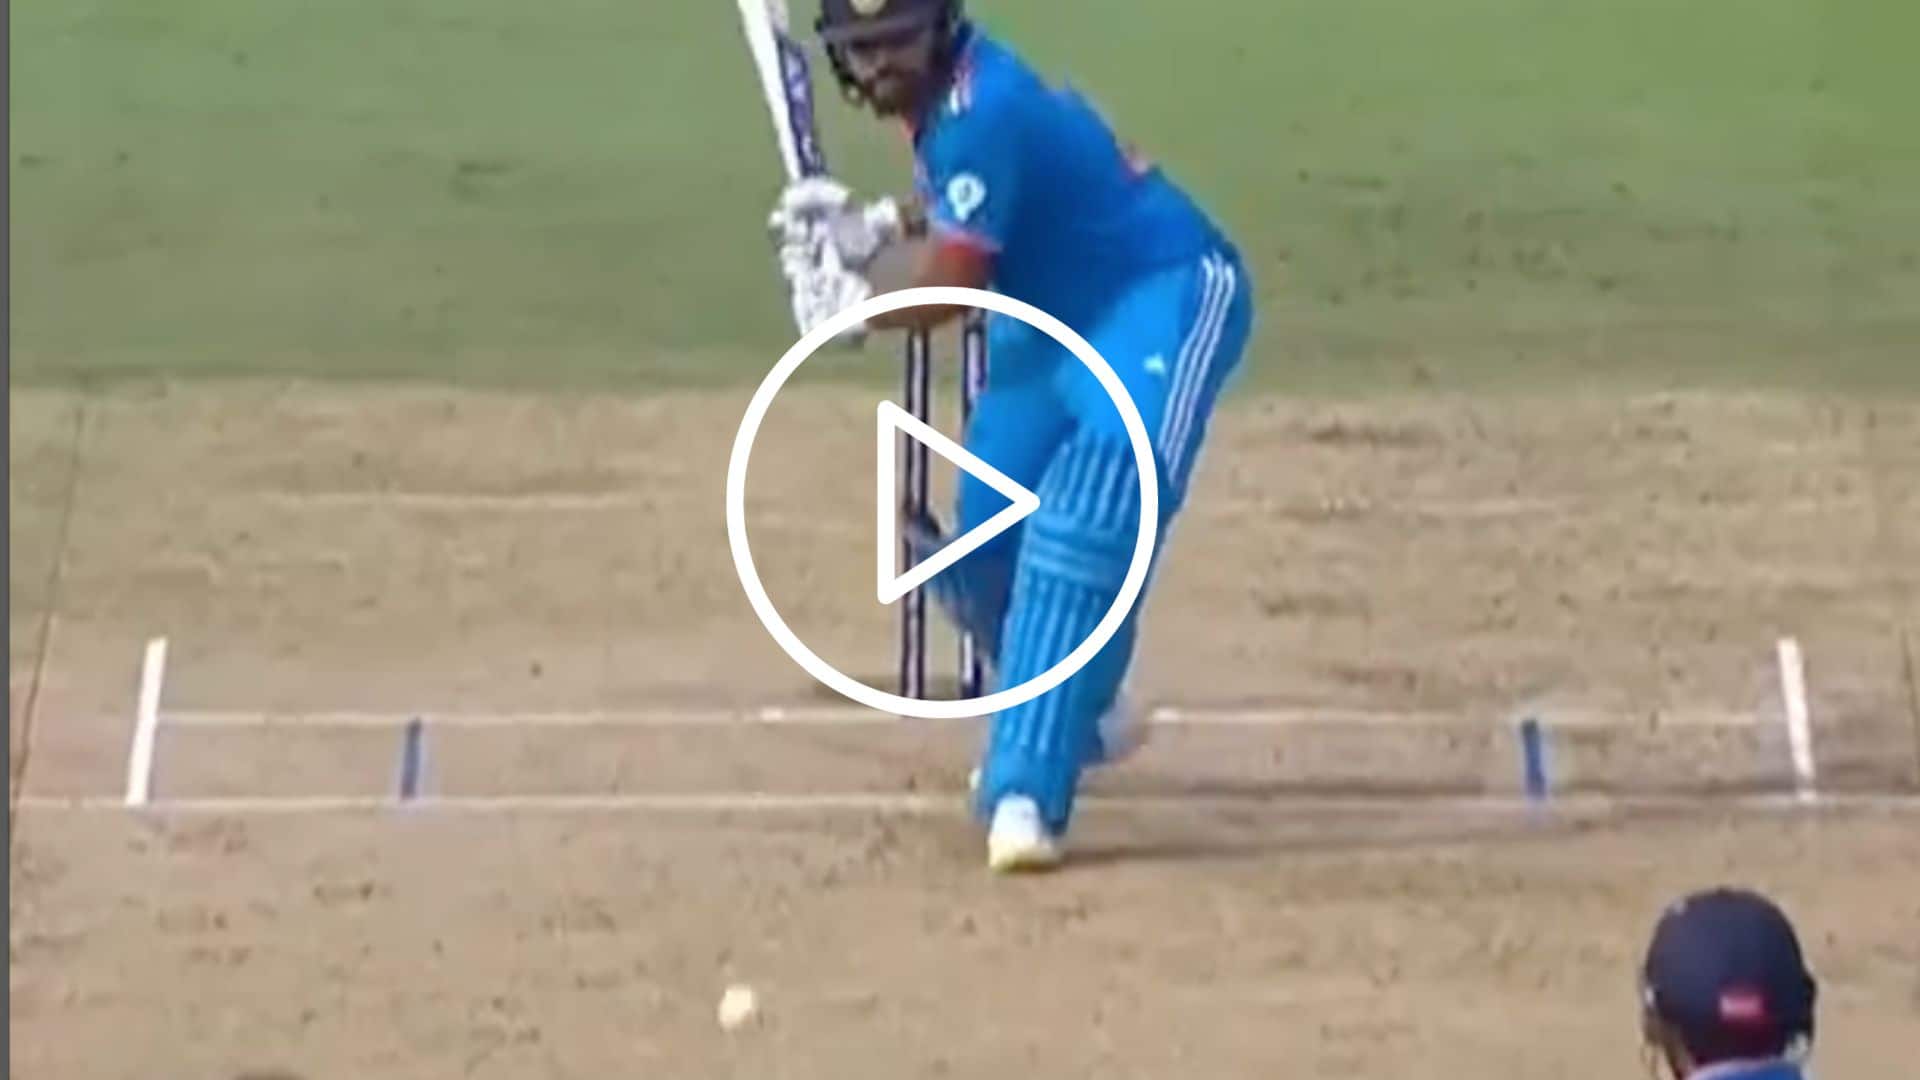 [Watch] Rohit Sharma's 'Famous Pull Shot' Leads To His DownFall After Aggressive 61